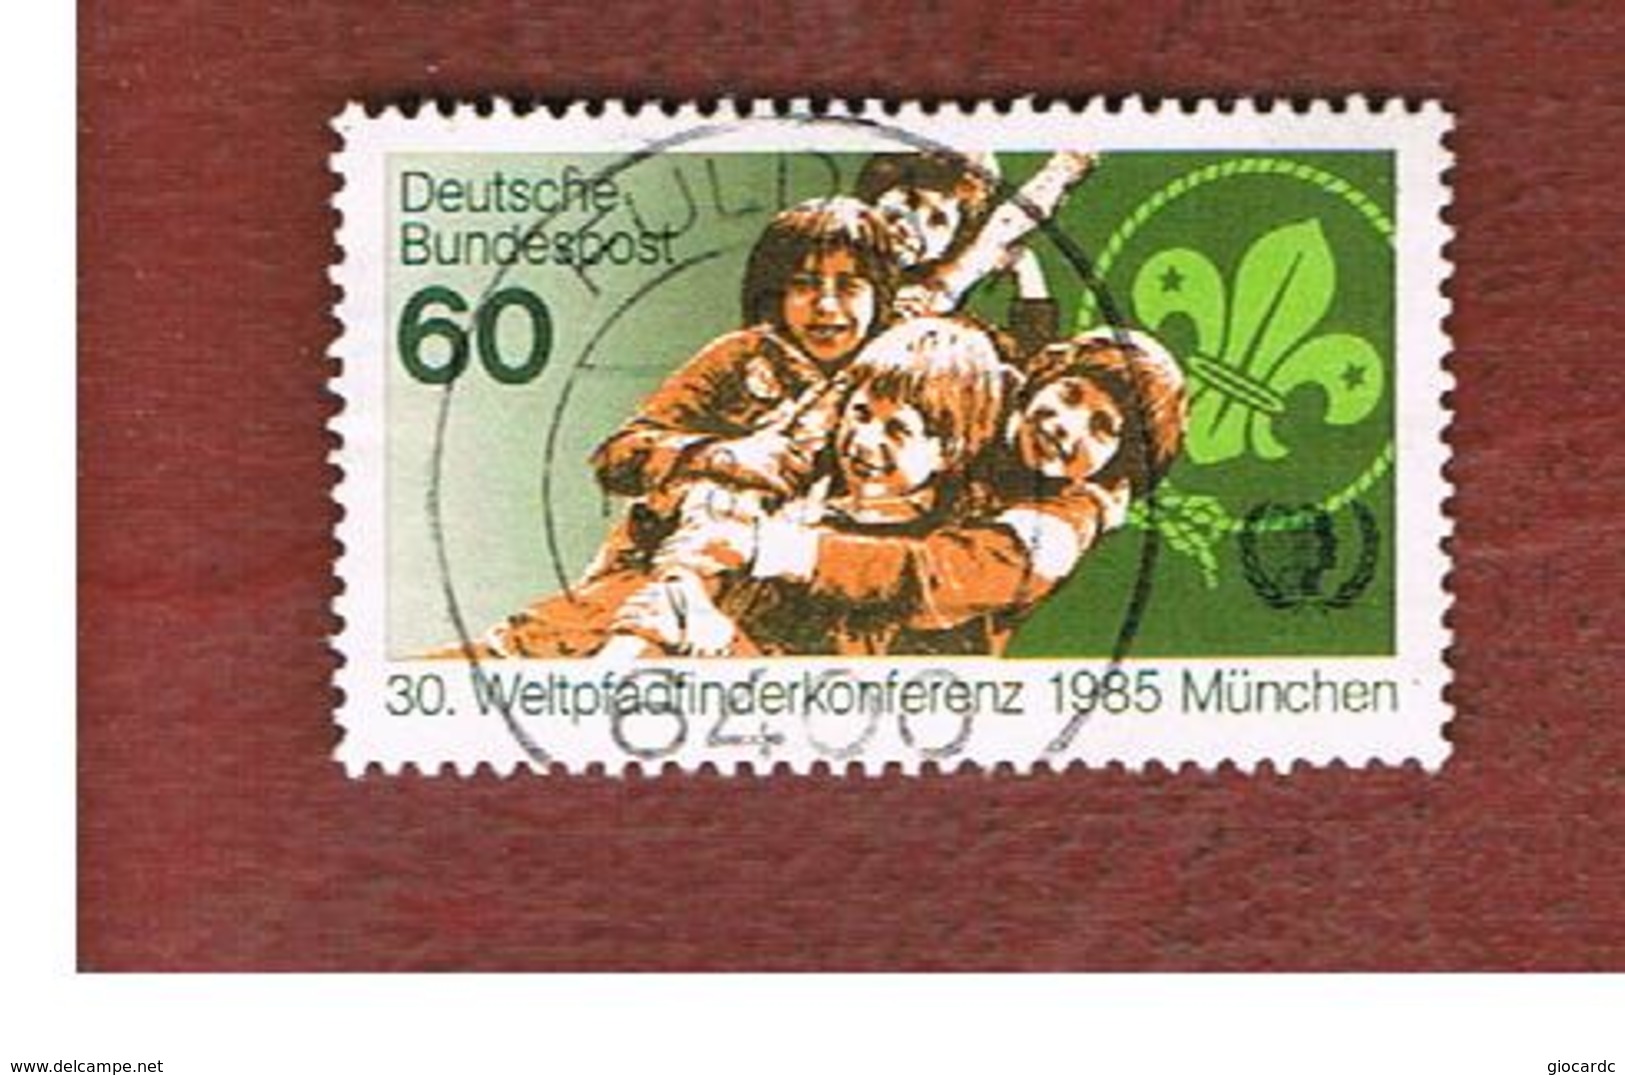 GERMANIA (GERMANY) - SG 2102 - 1985 WORLD SCOUTS CONFERENCE  -   USED - Usados